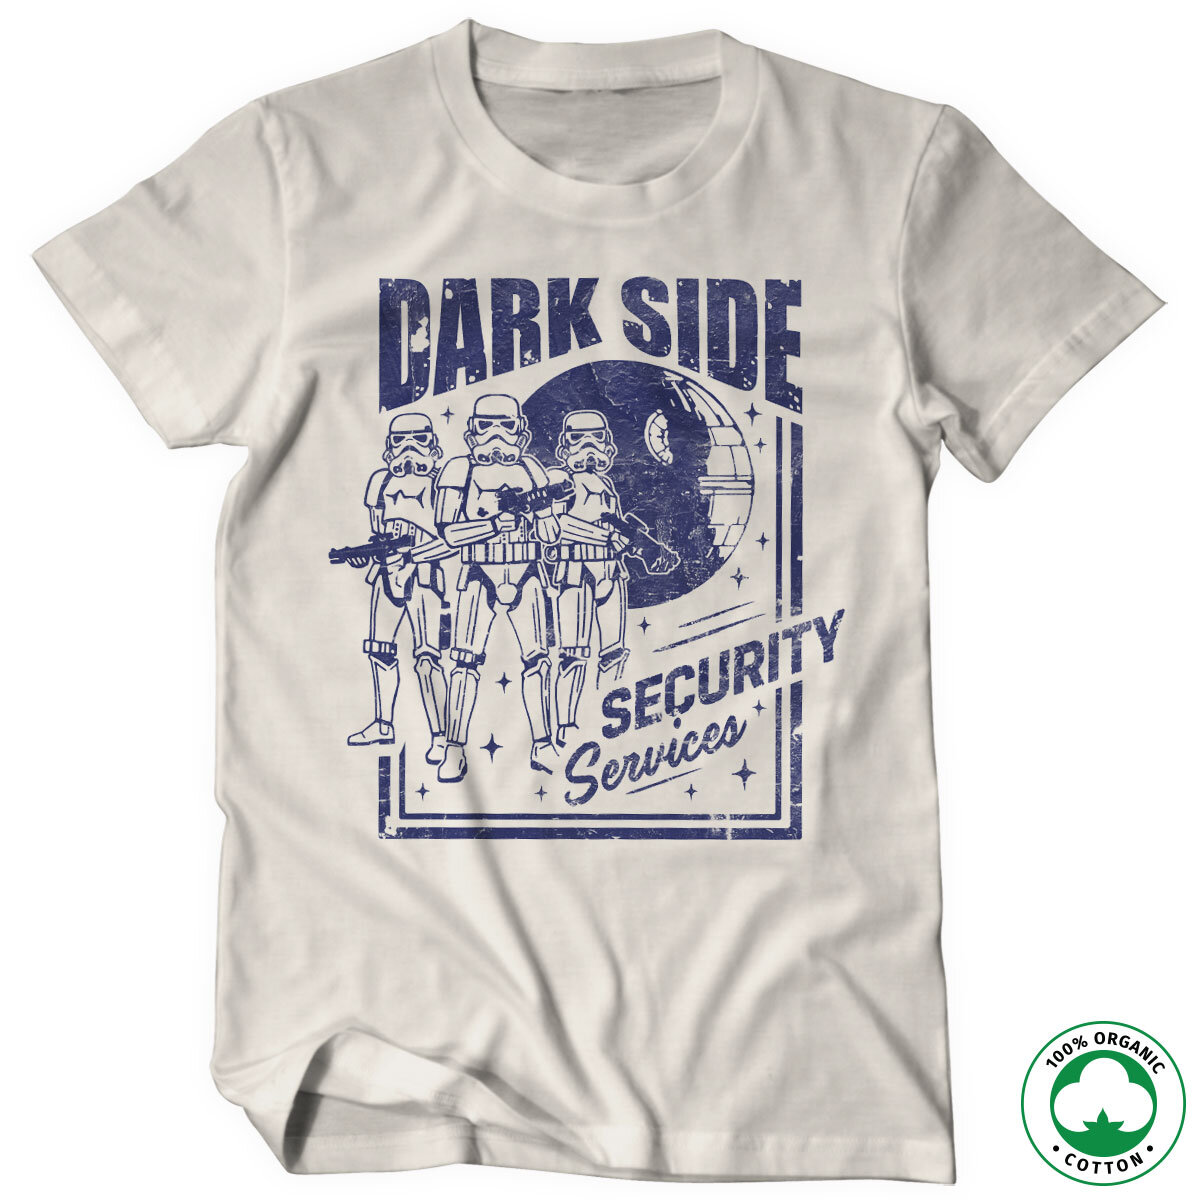 Dark Side Security Services Organic T-Shirt